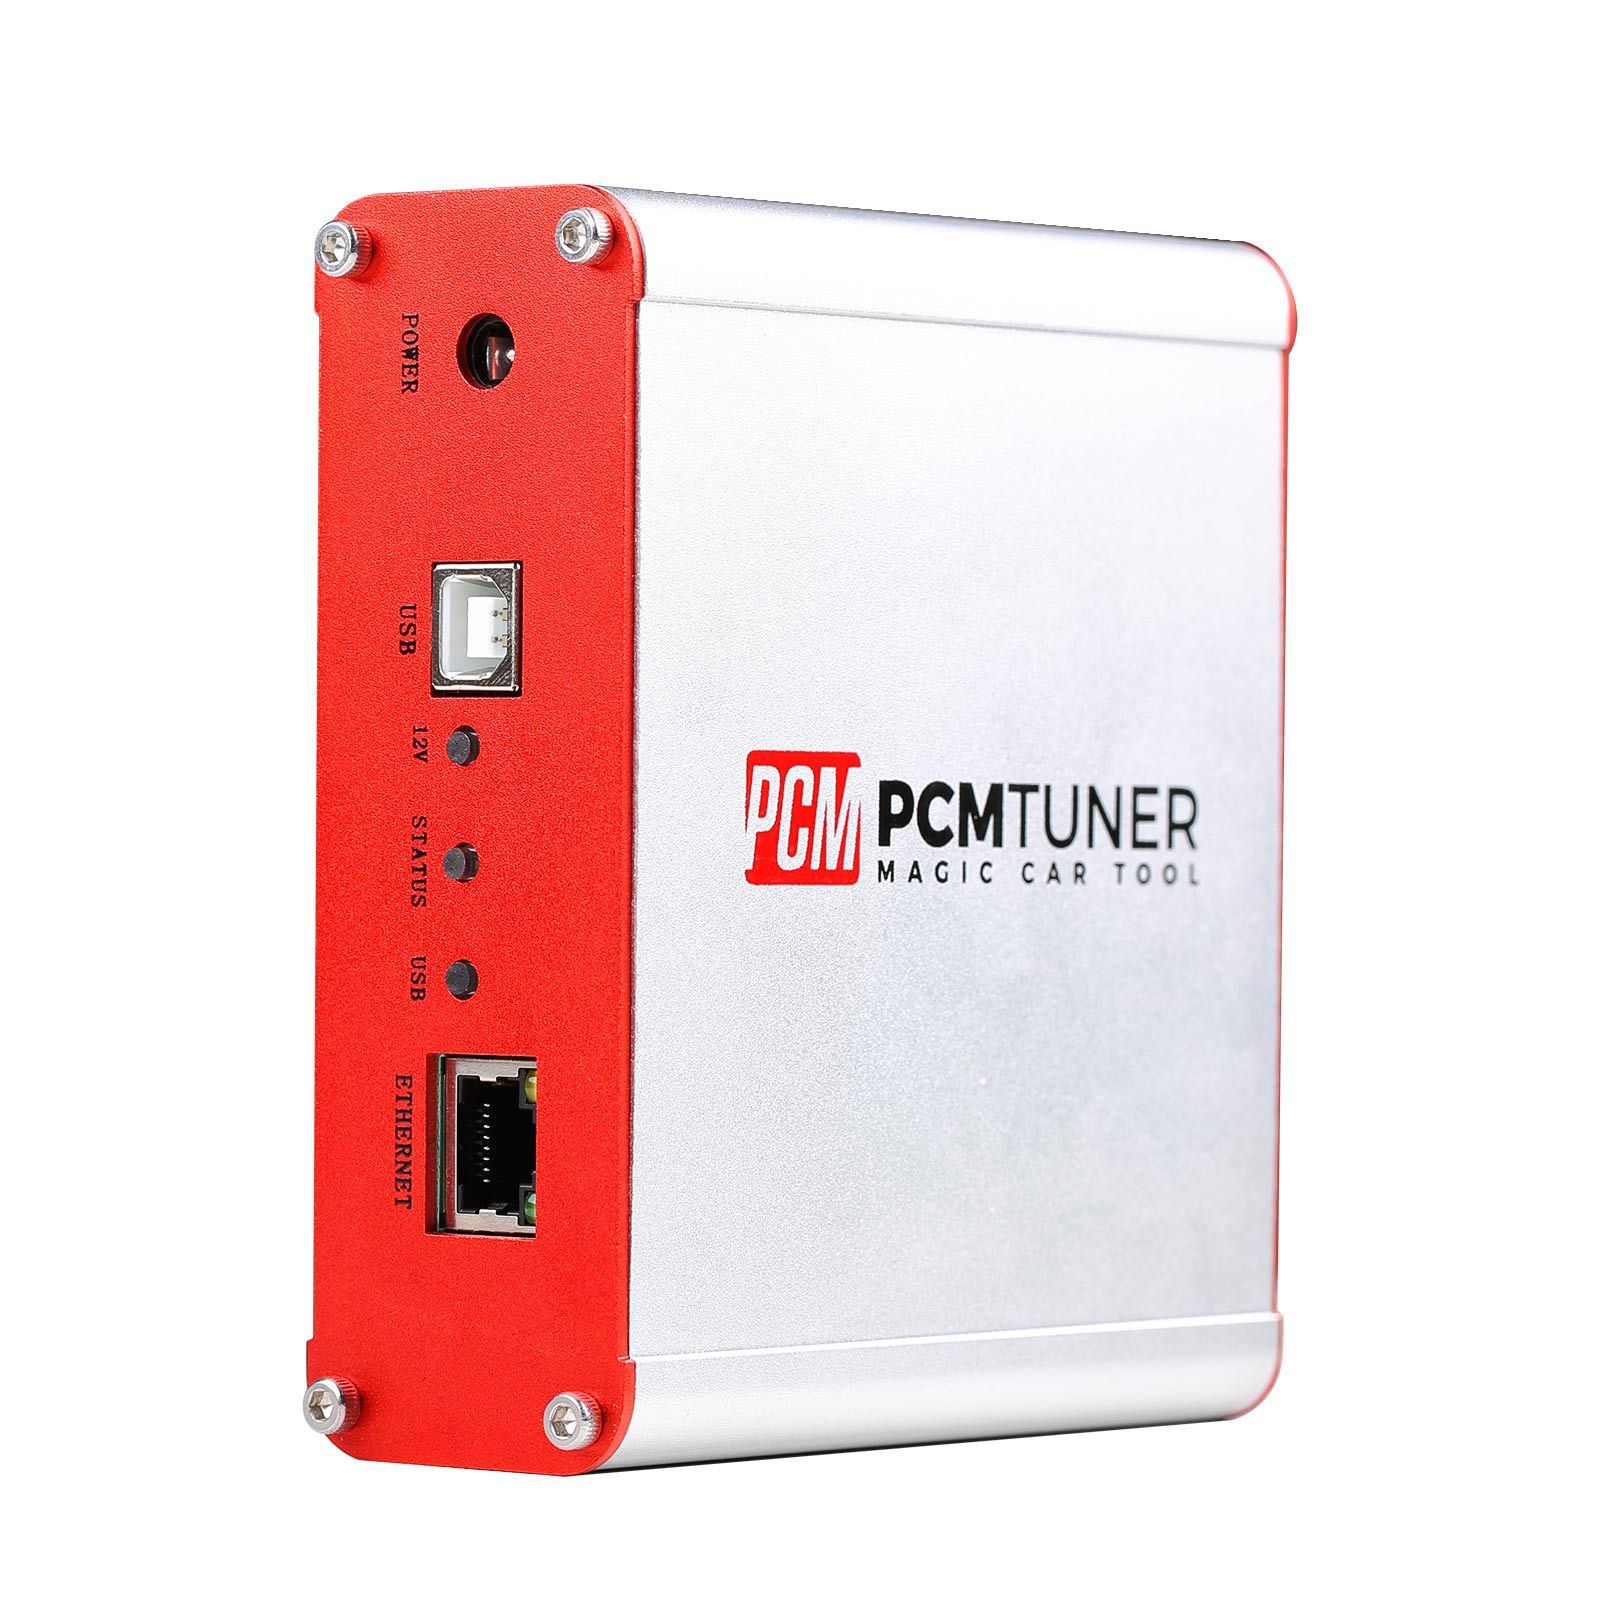 2022 Newest V1.26 PCMtuner ECU Programmer with 67 Modules Free Update Online Support Checksum and Pinout Diagram with Free Damaos